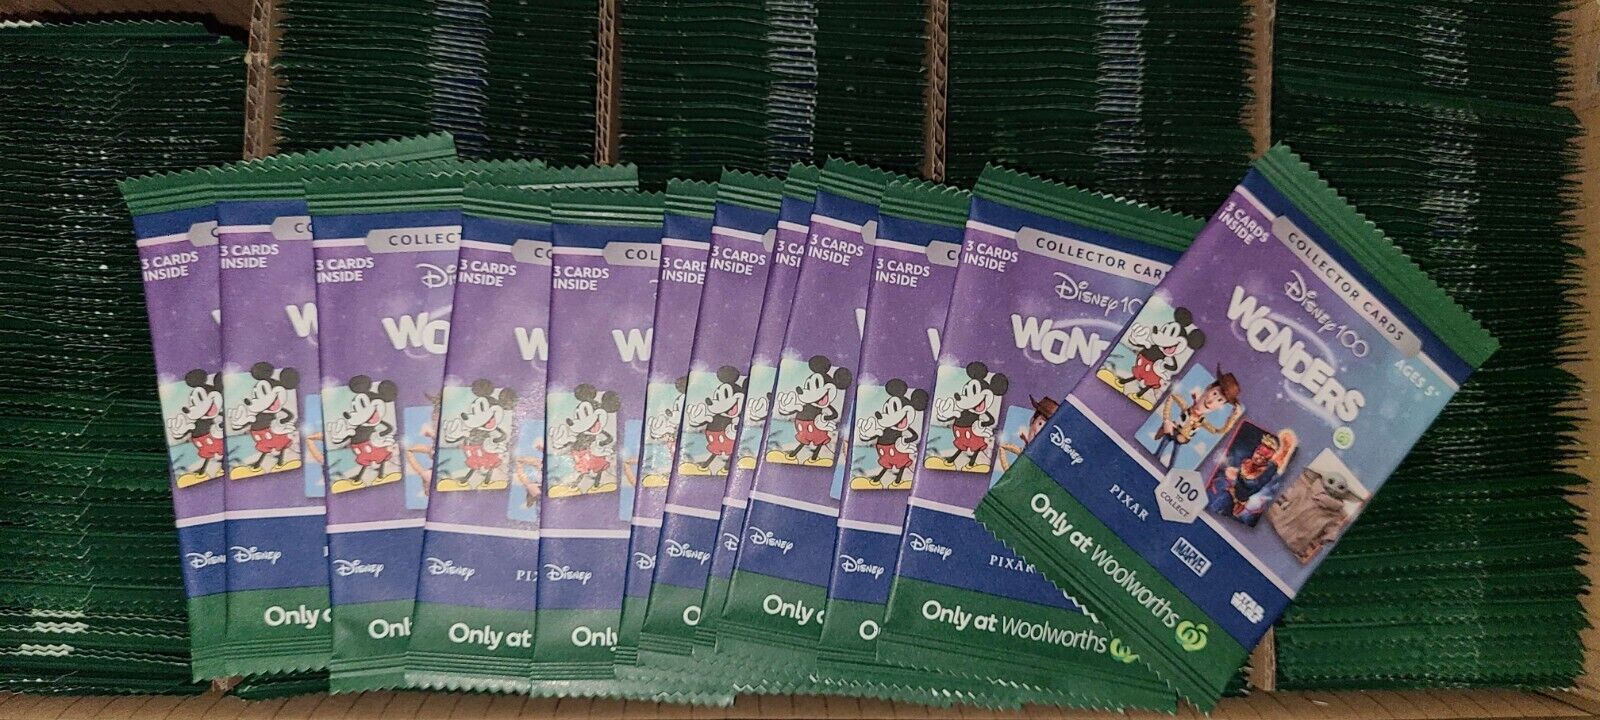 DISNEY 100 WONDERS COLLECTORS Trading Cards Woolworths 500 PACKS 1500 CARDS